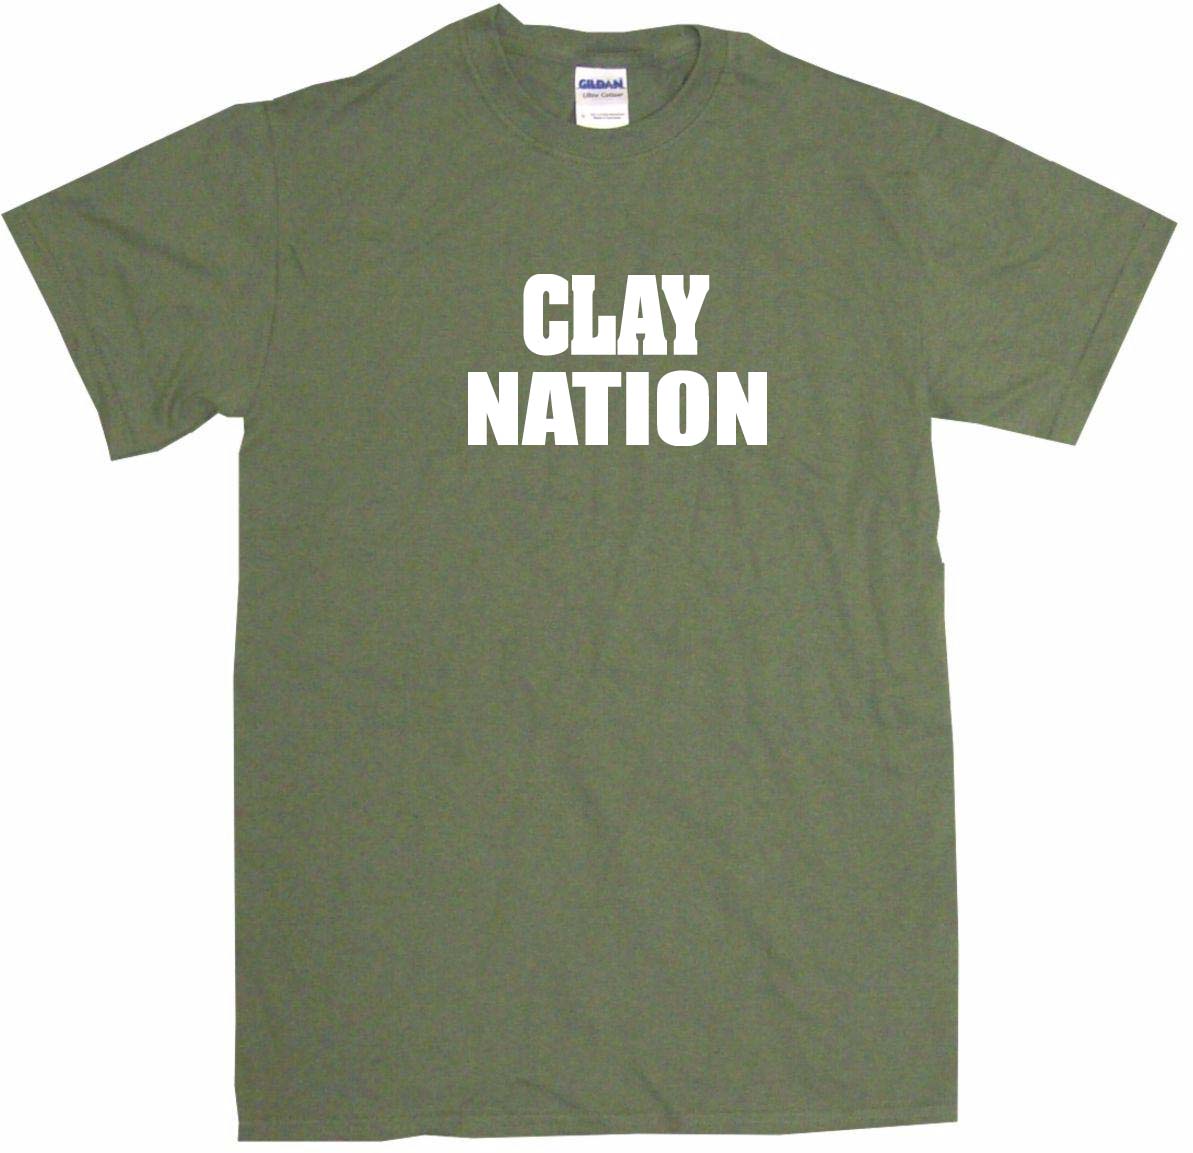 Clay Nation Mens Tee Shirt Pick Size Color Small-6XL